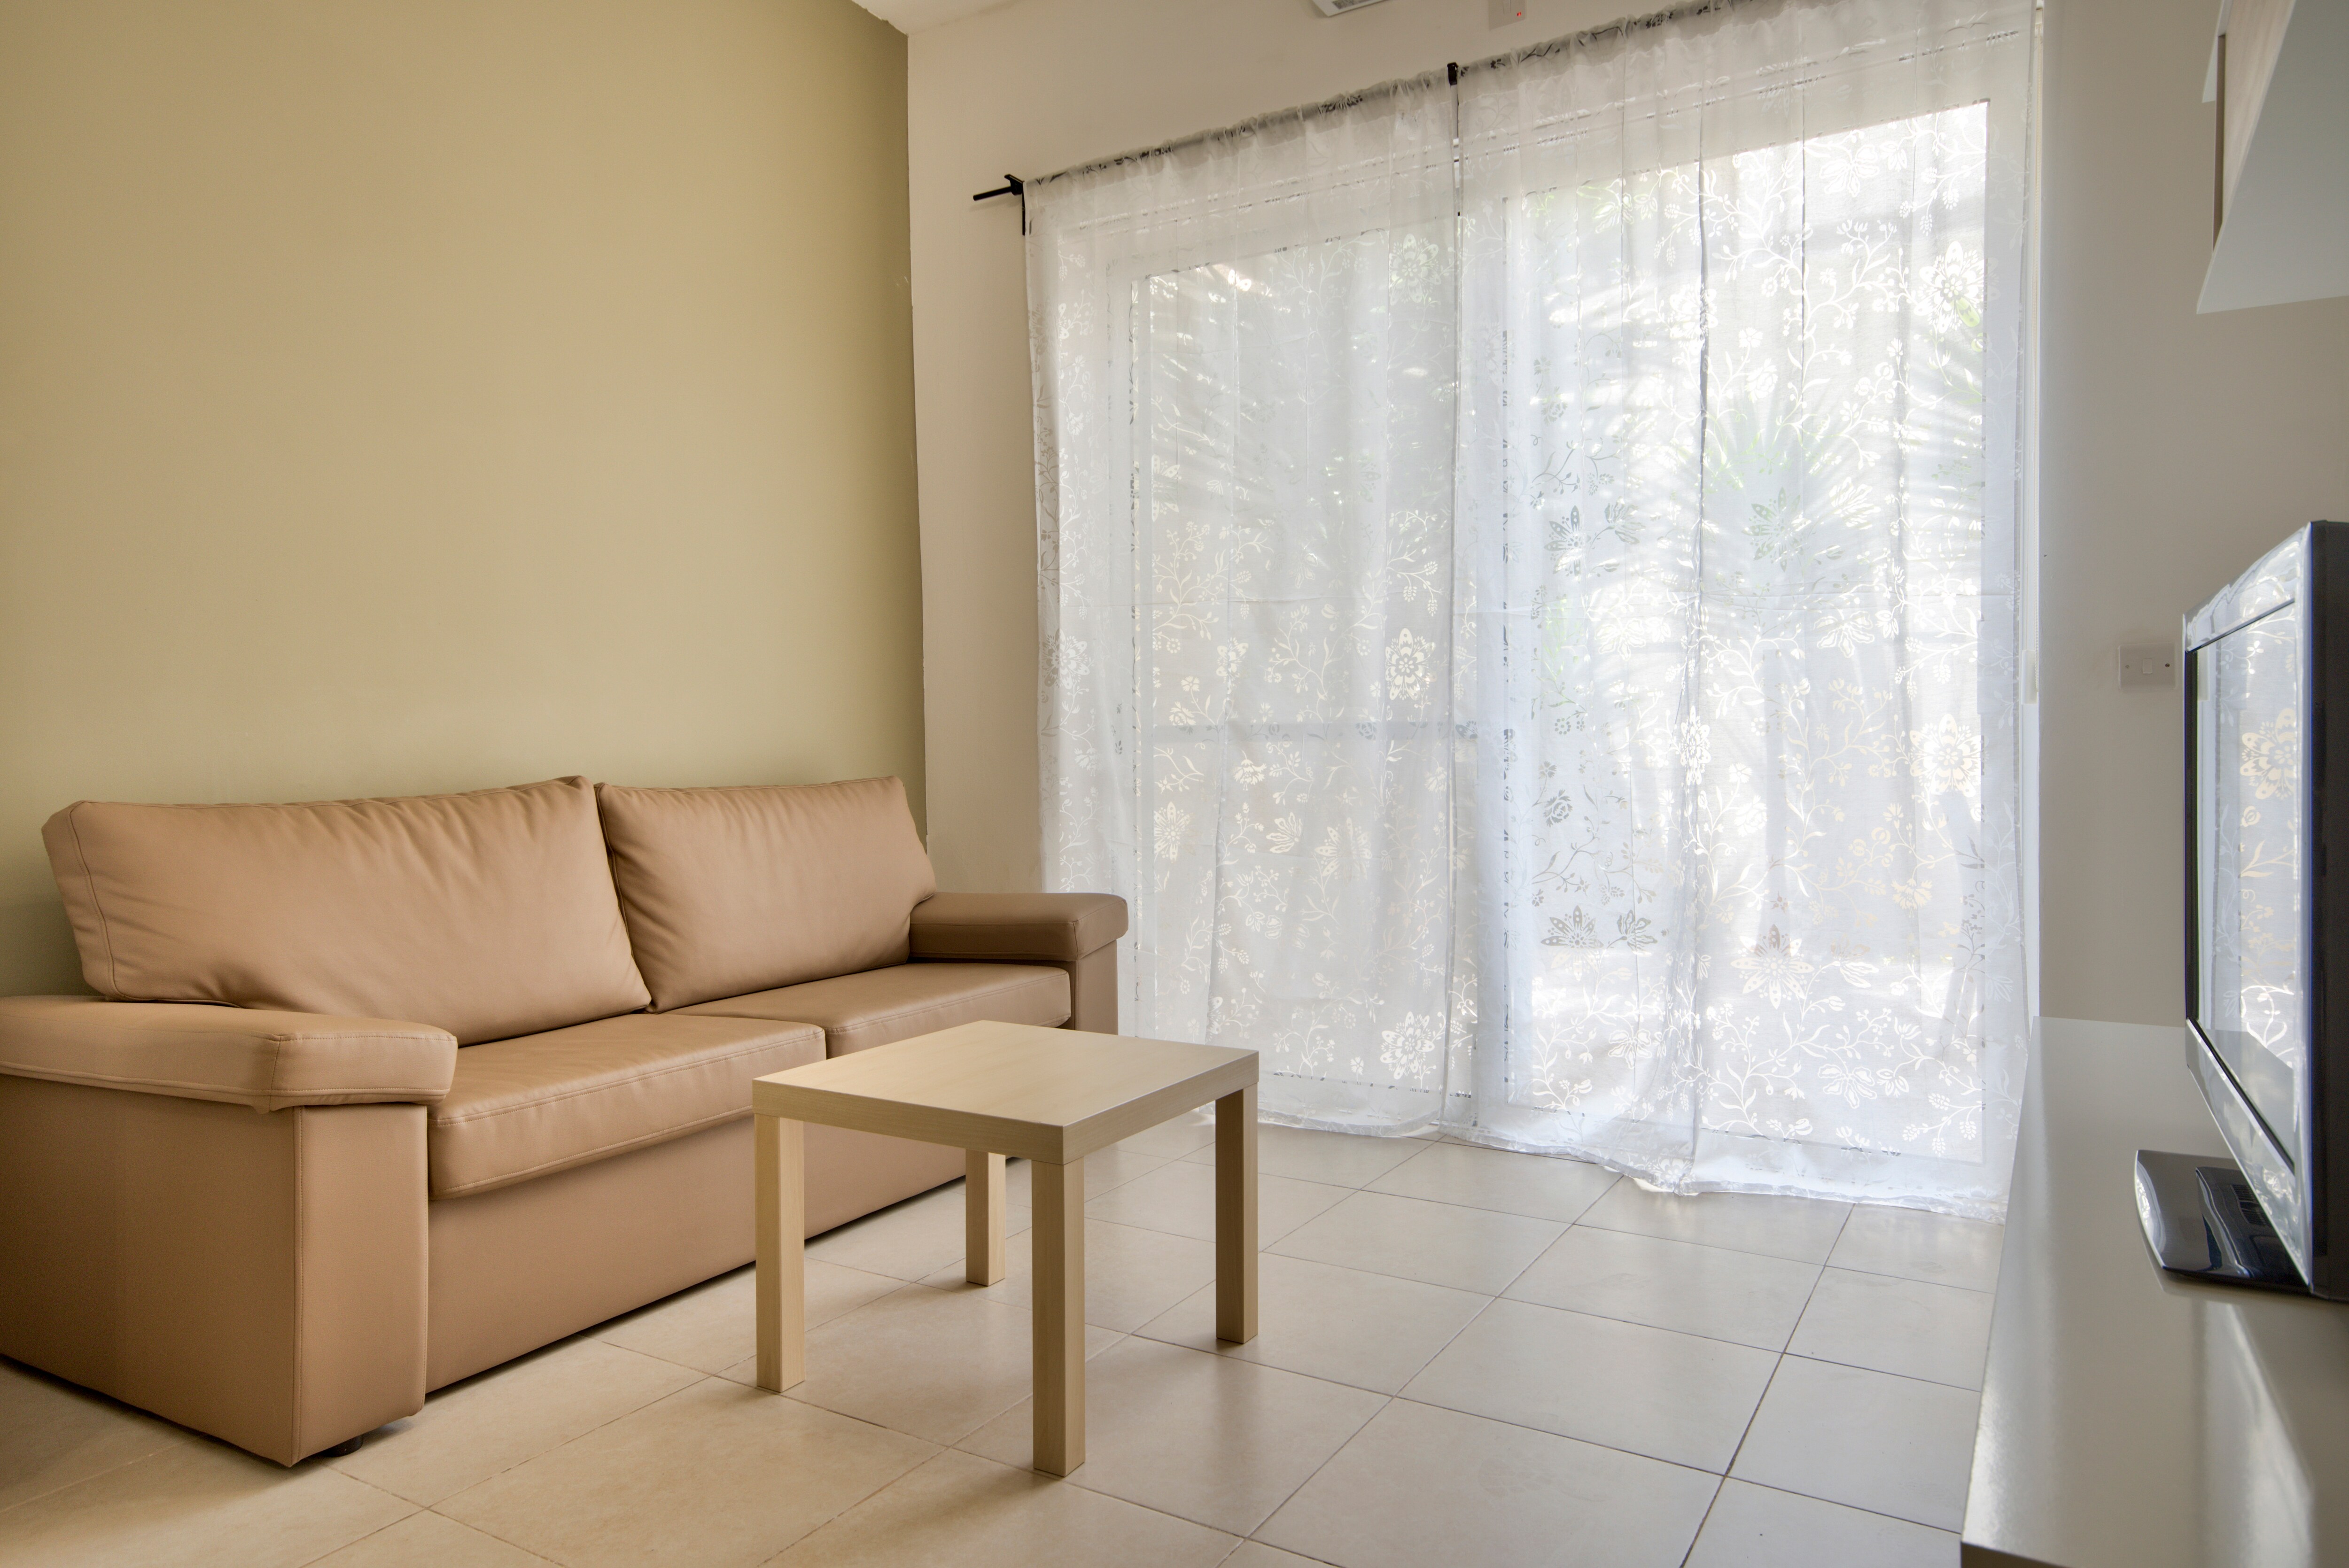 Property Image 1 - Lovely Light Filled Apartment with Airy Outdoor Patio